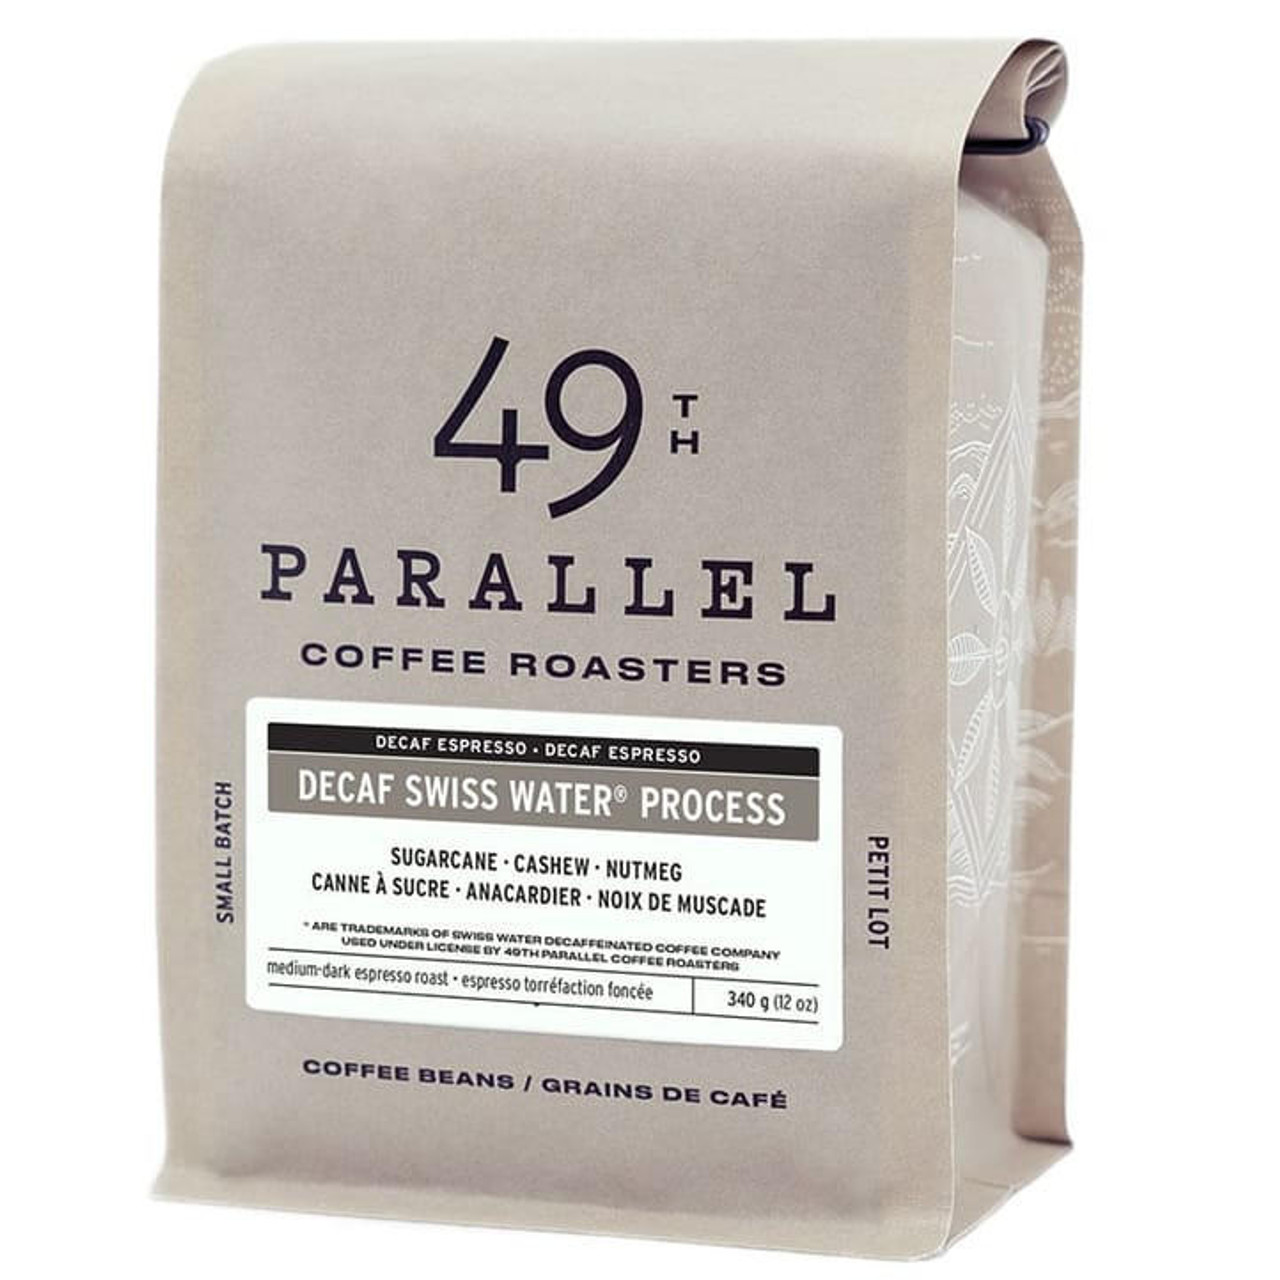  49th Parallel DECAF Swiss Water Process Medium Blend Coffee Beans 0.34 kg / 0.75 lbs (6/Case) 